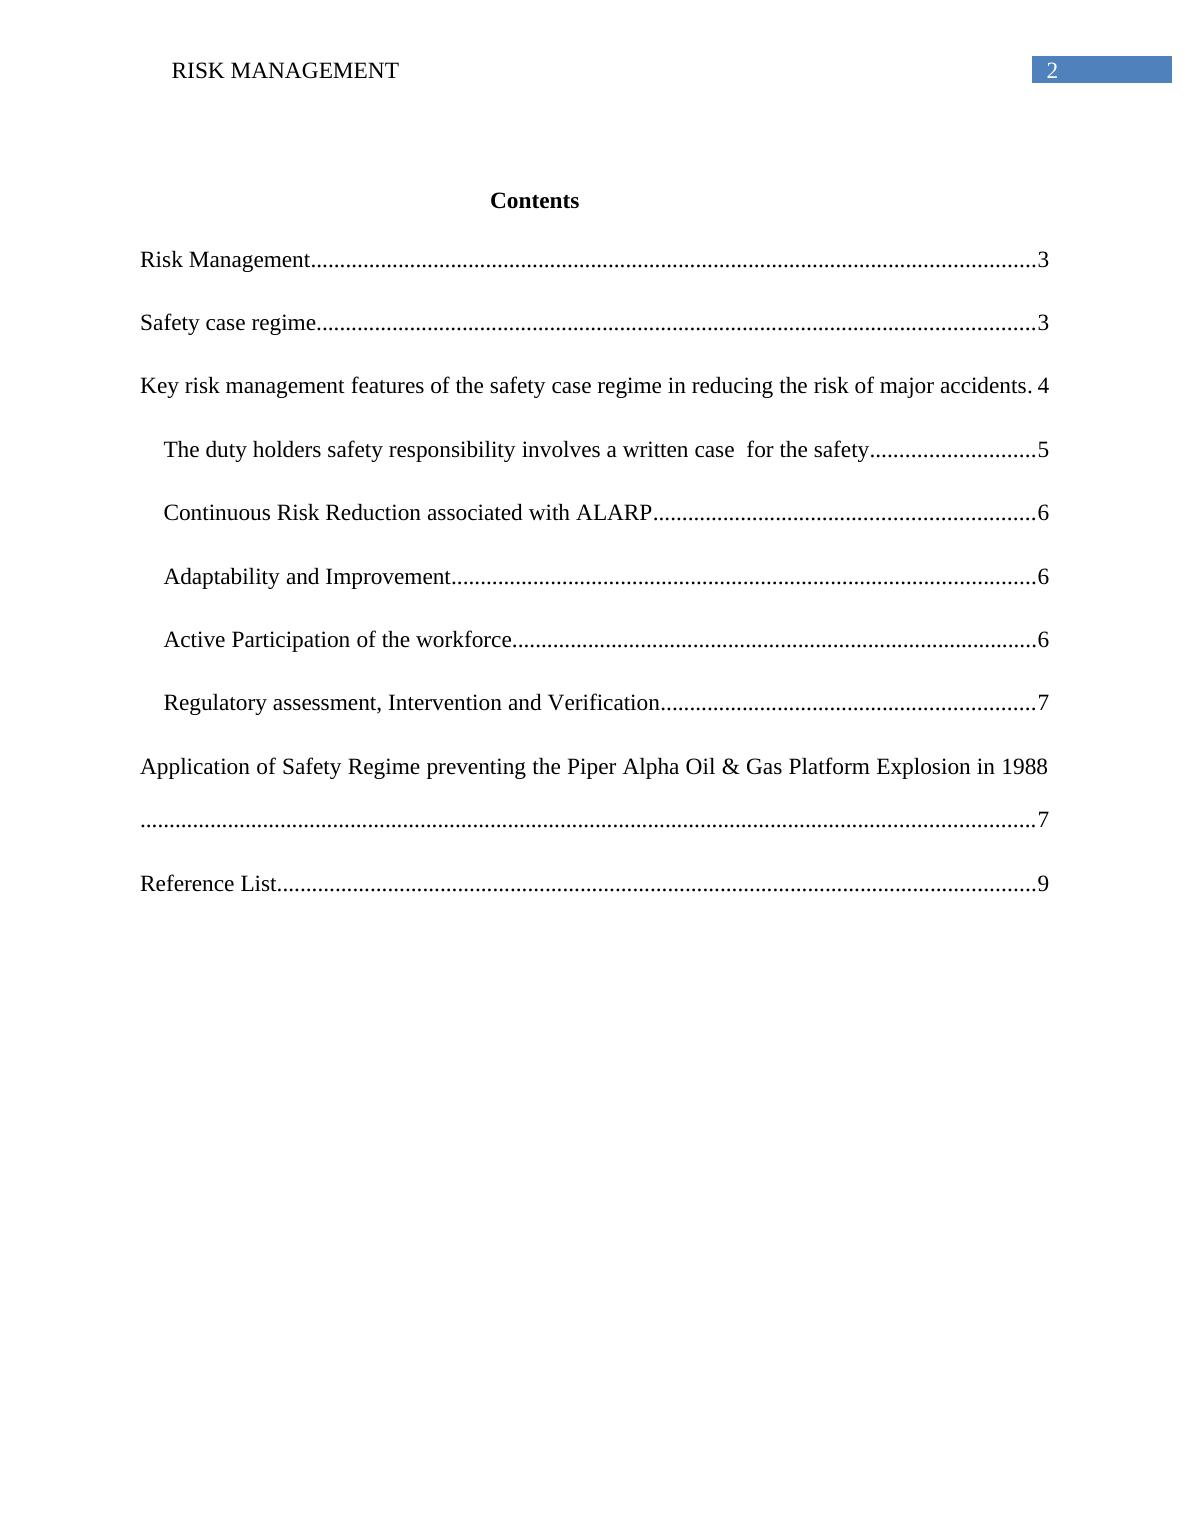 FIN4232 - Risk Management - Research Paper_3